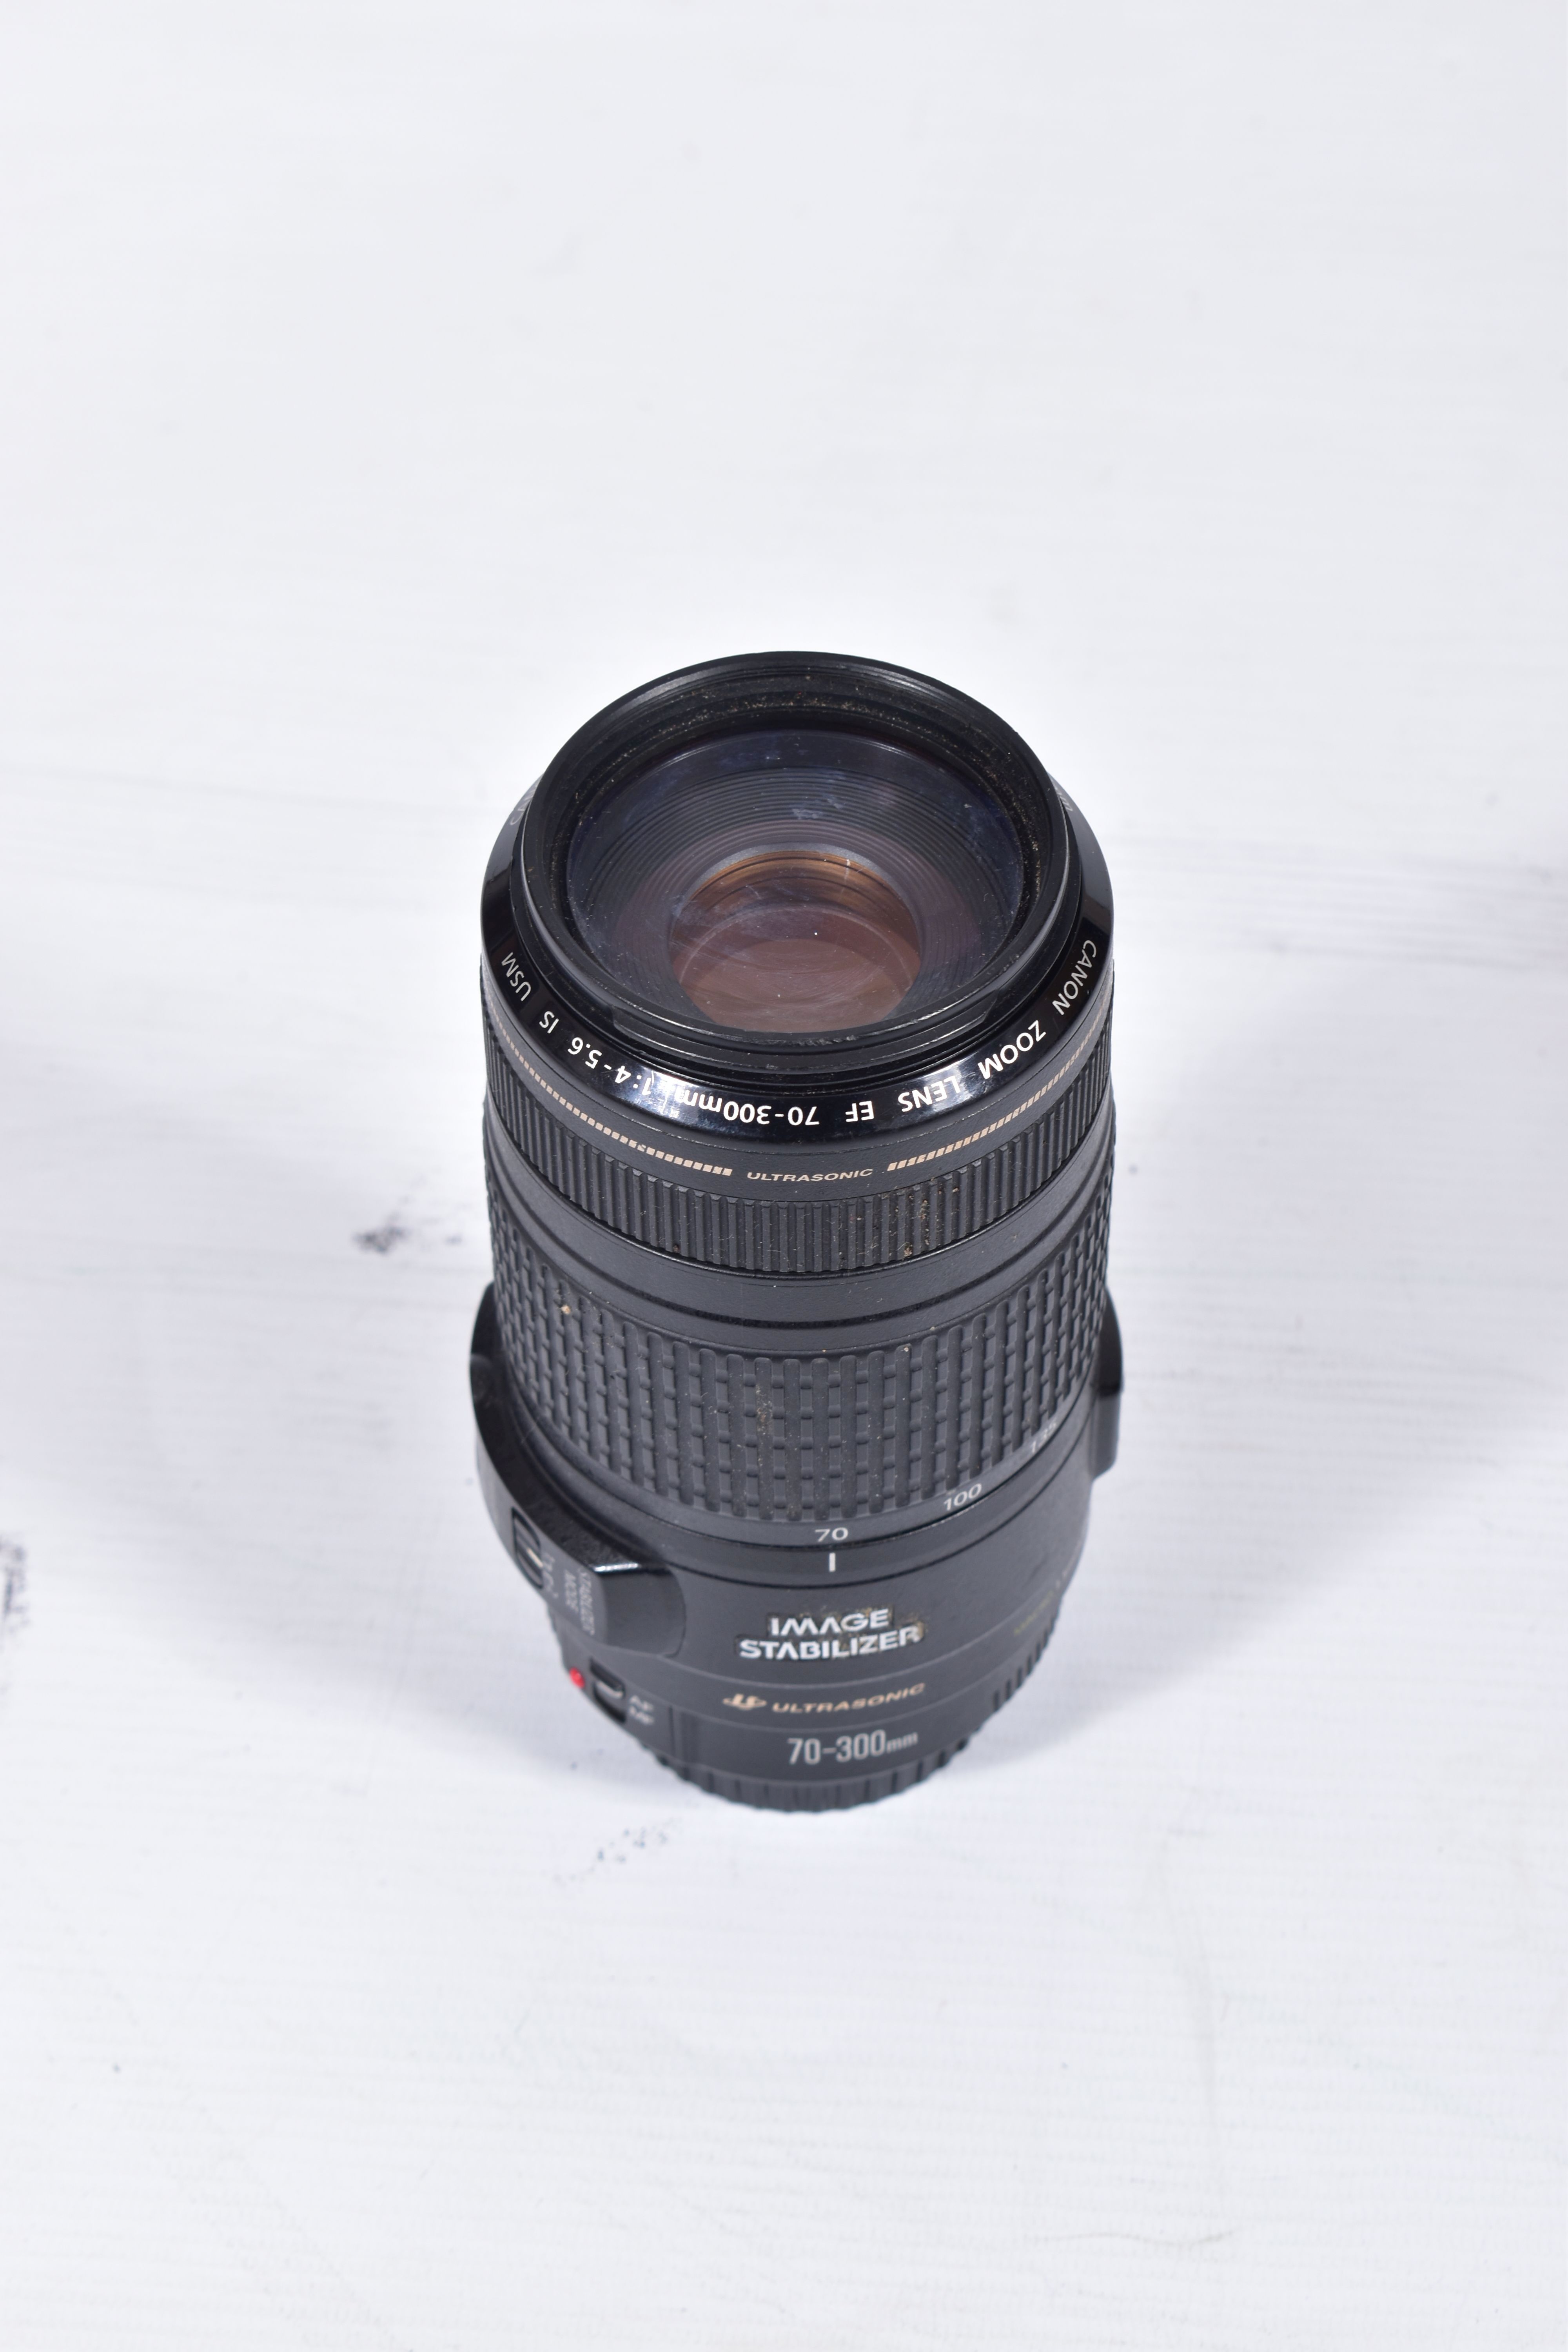 FOUR CANON AND CANON FIT ZOOM LENSES comprising of a Canon 70-300 f4 EF IS USM lens, a Sigma 70- - Image 4 of 10